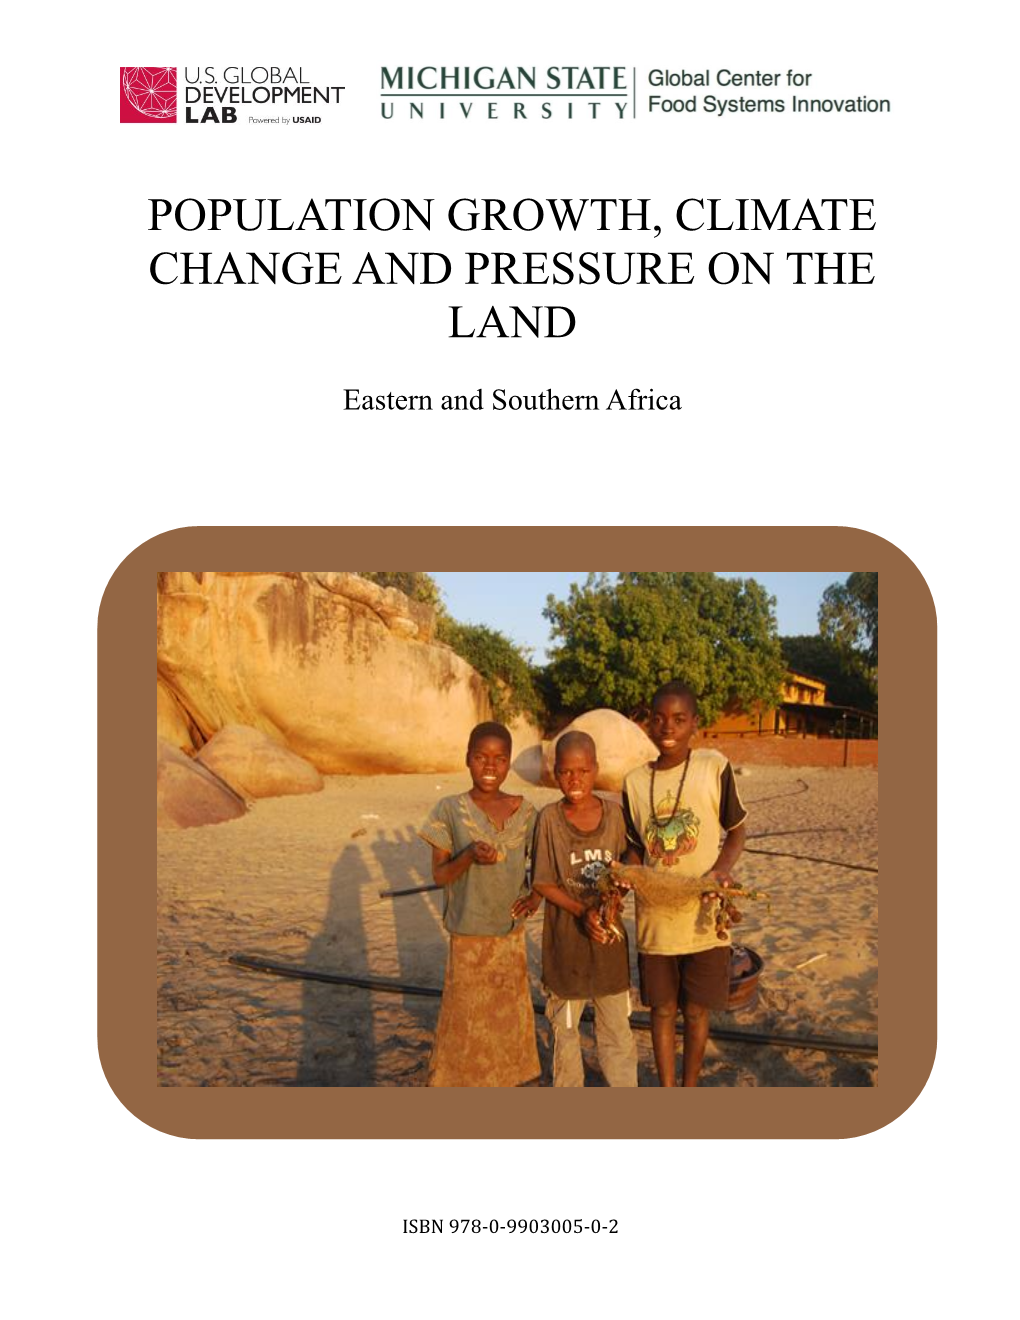 Population Growth, Climate Change and Pressure on the Land